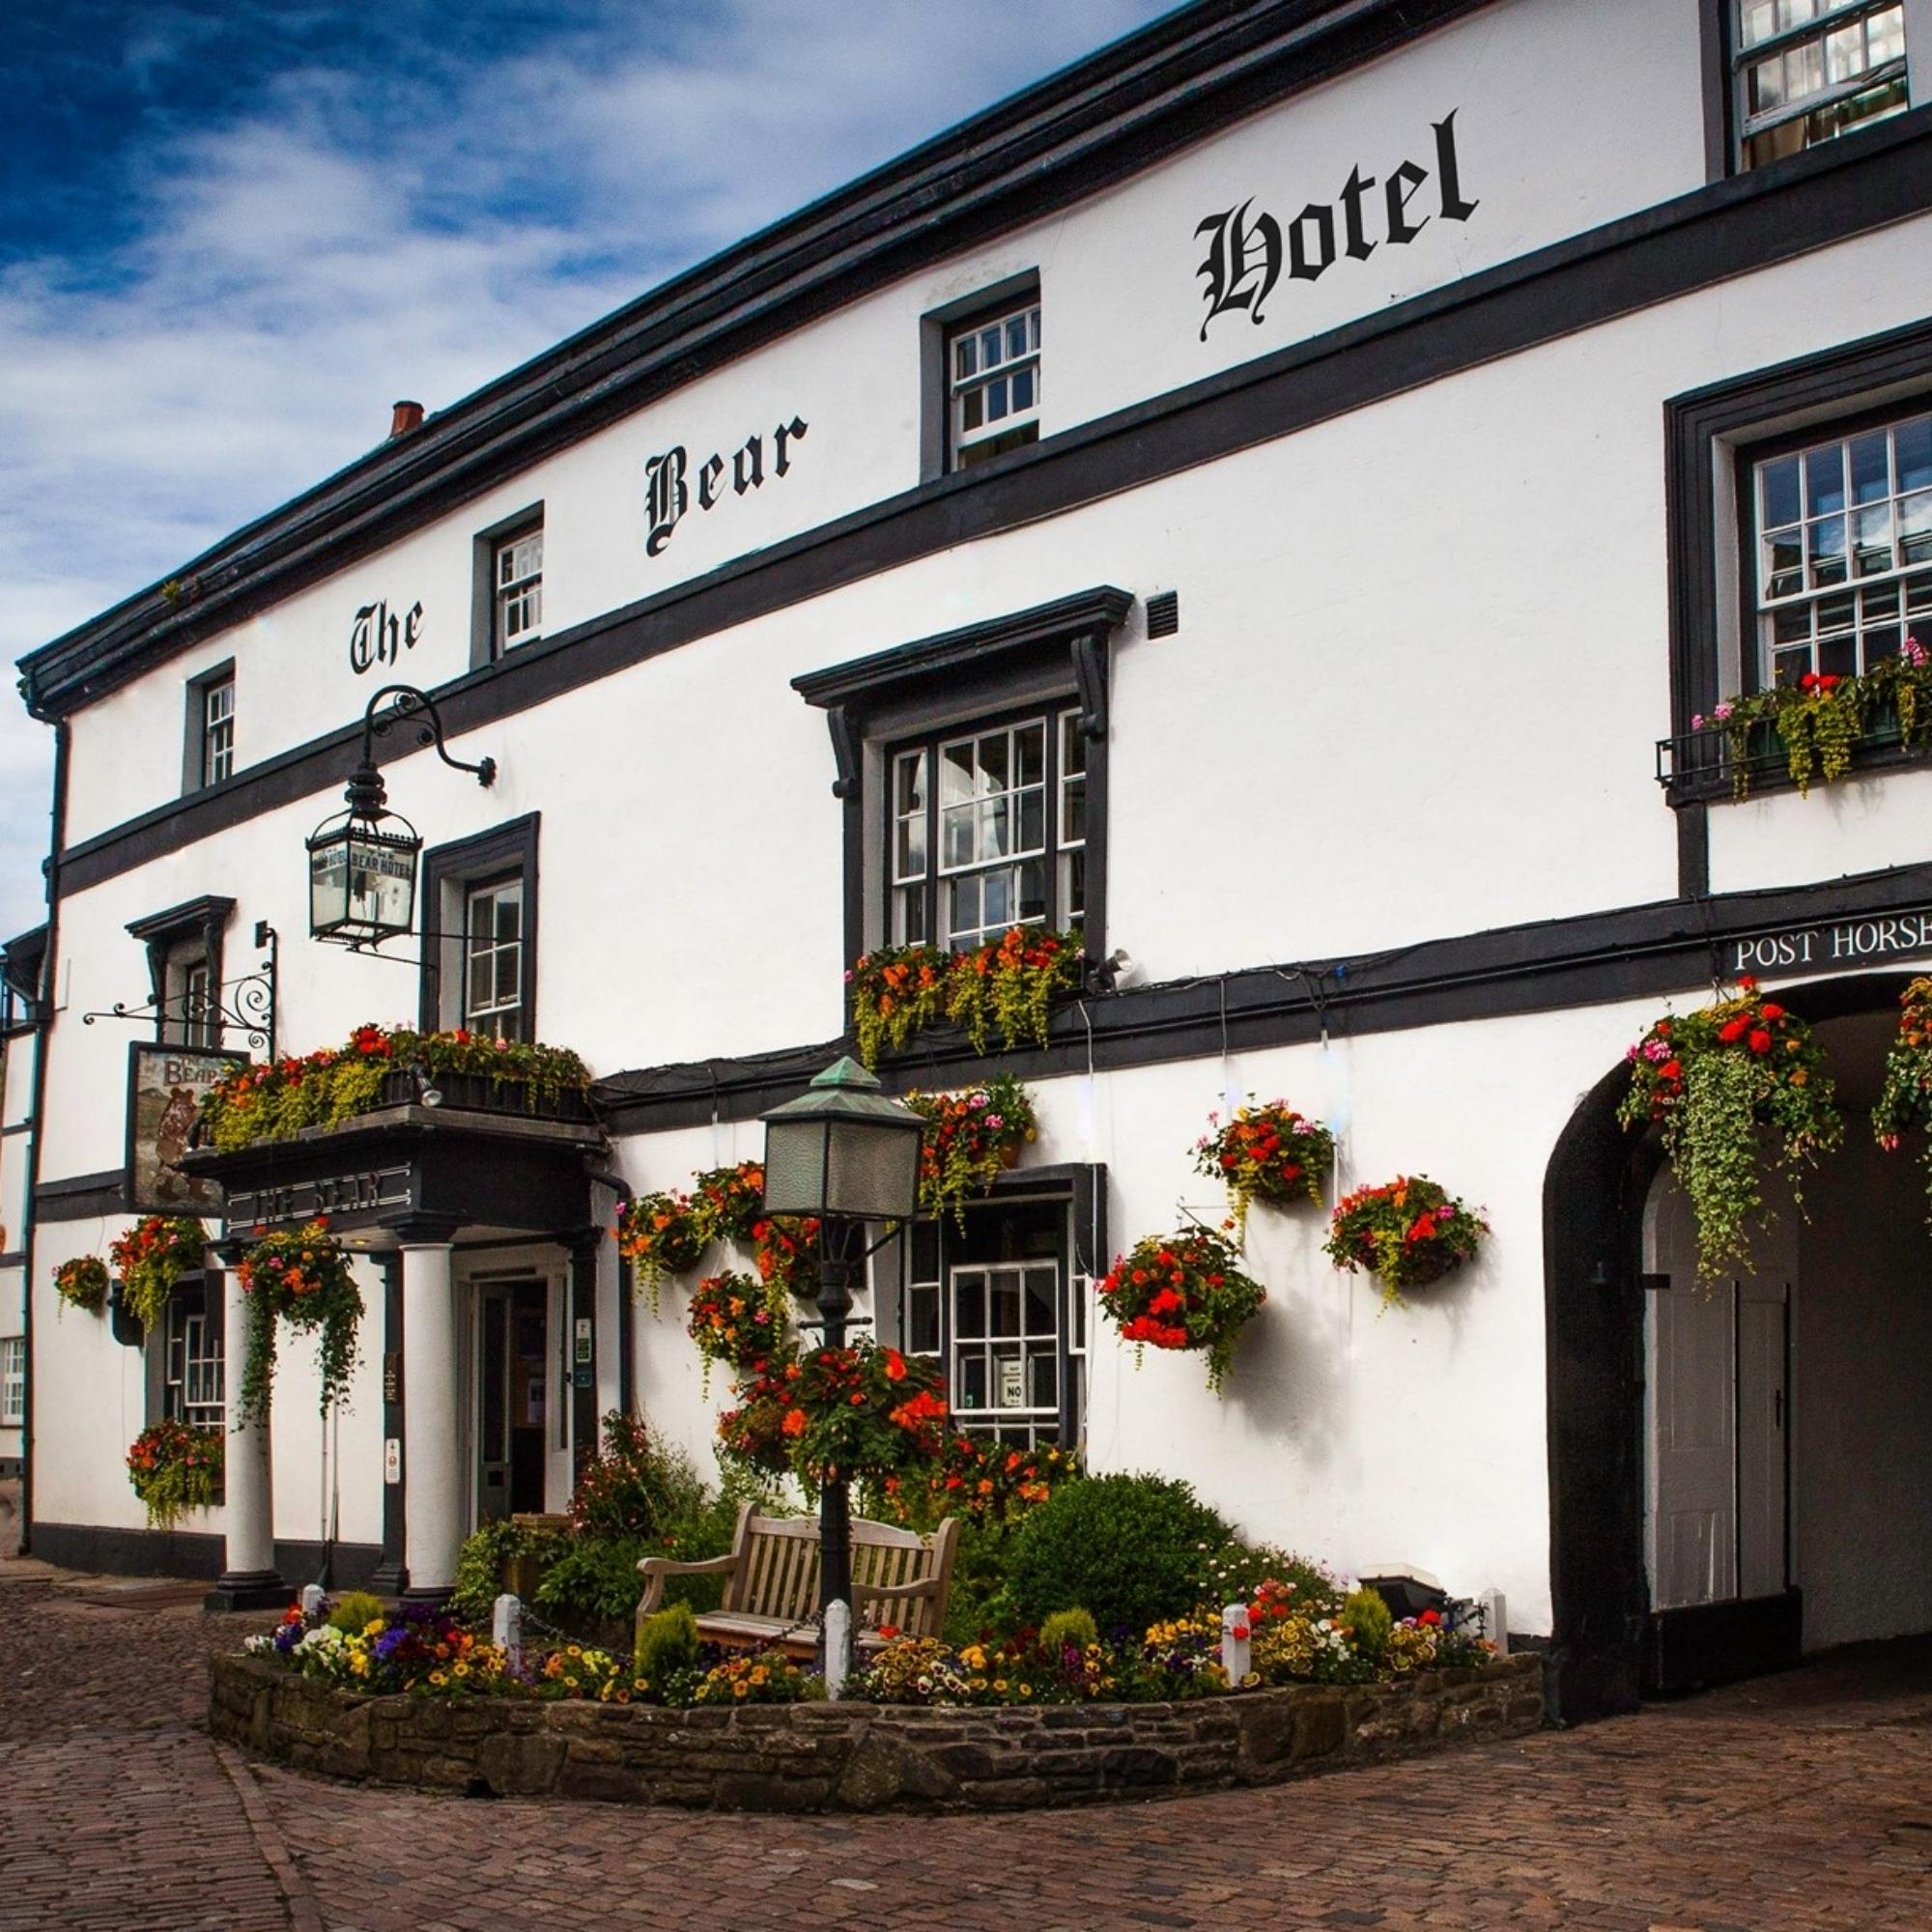 Hotels in Mid Wales holidays at Cool Places